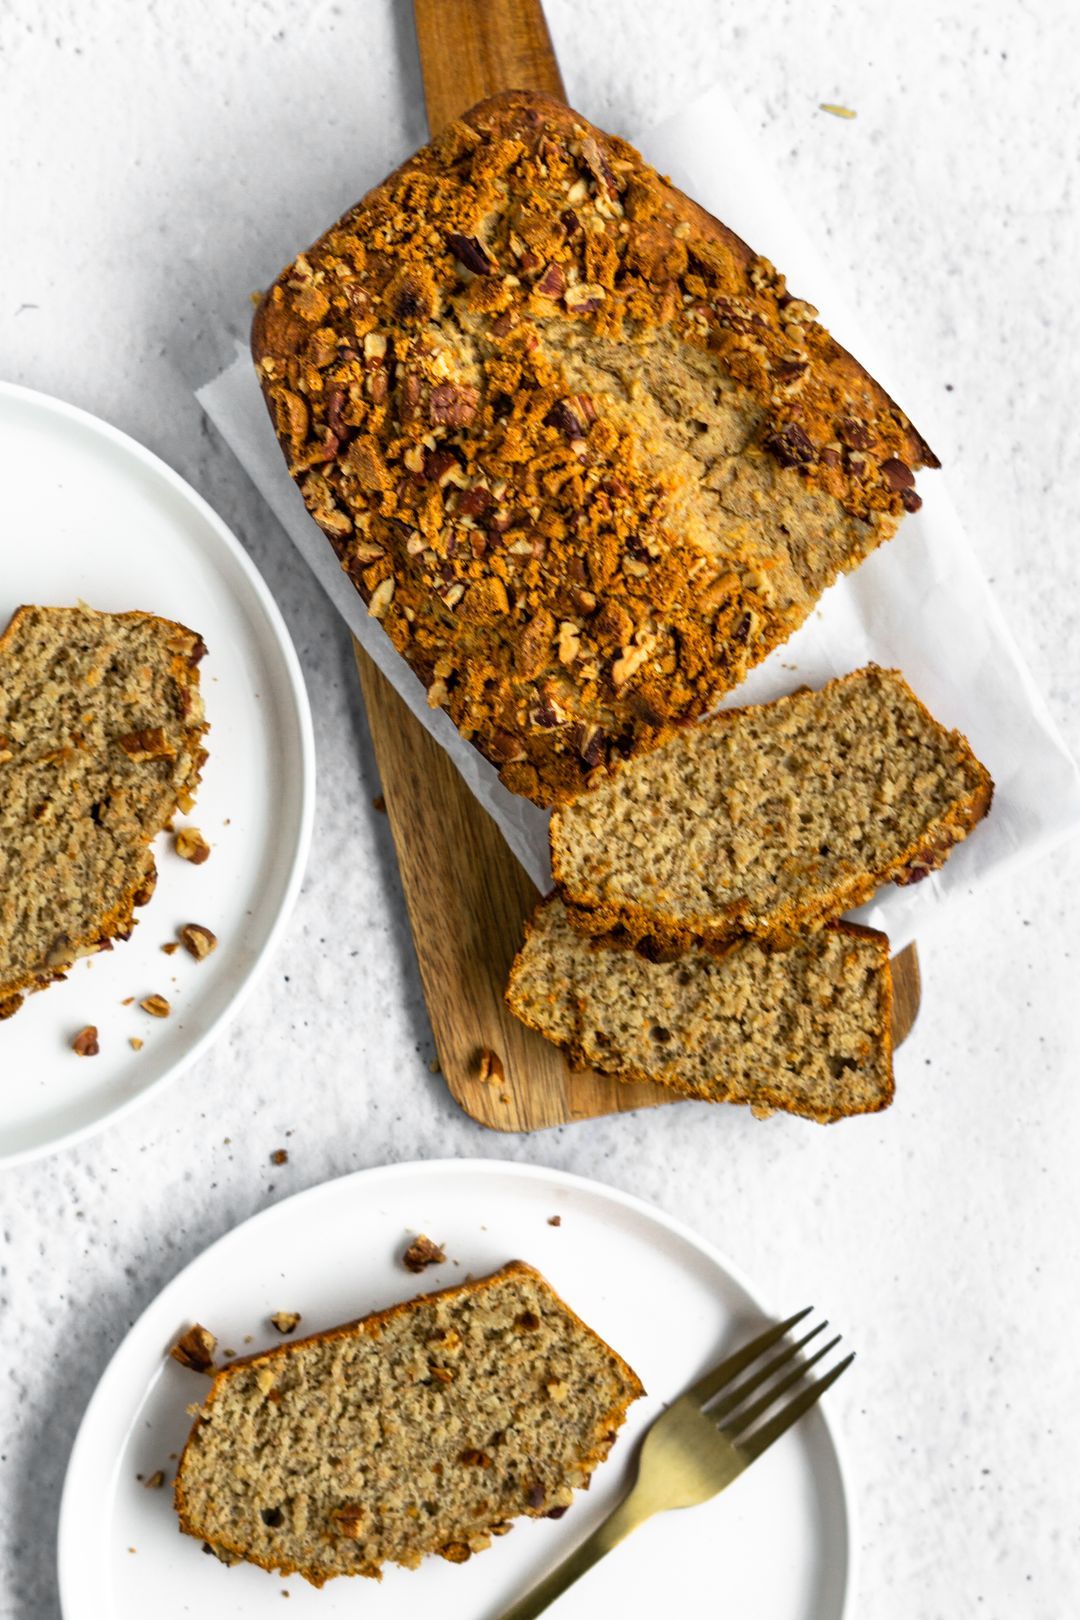 Banana bread with speculoos and pecan nuts